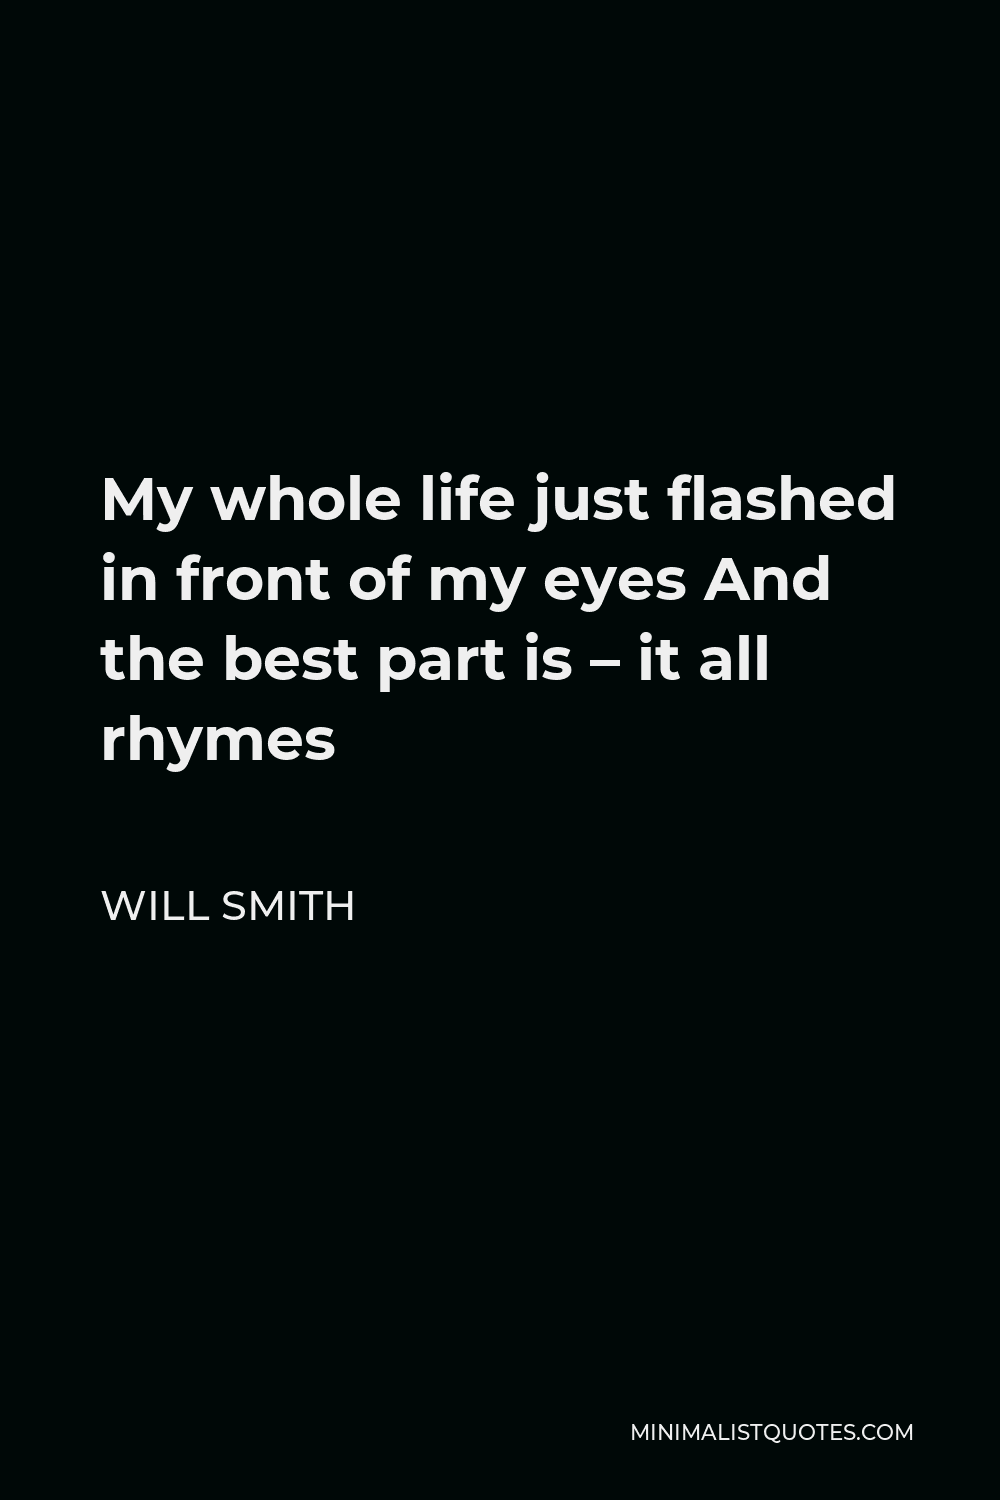 Will Smith Quote - My whole life just flashed in front of my eyes And the best part is – it all rhymes